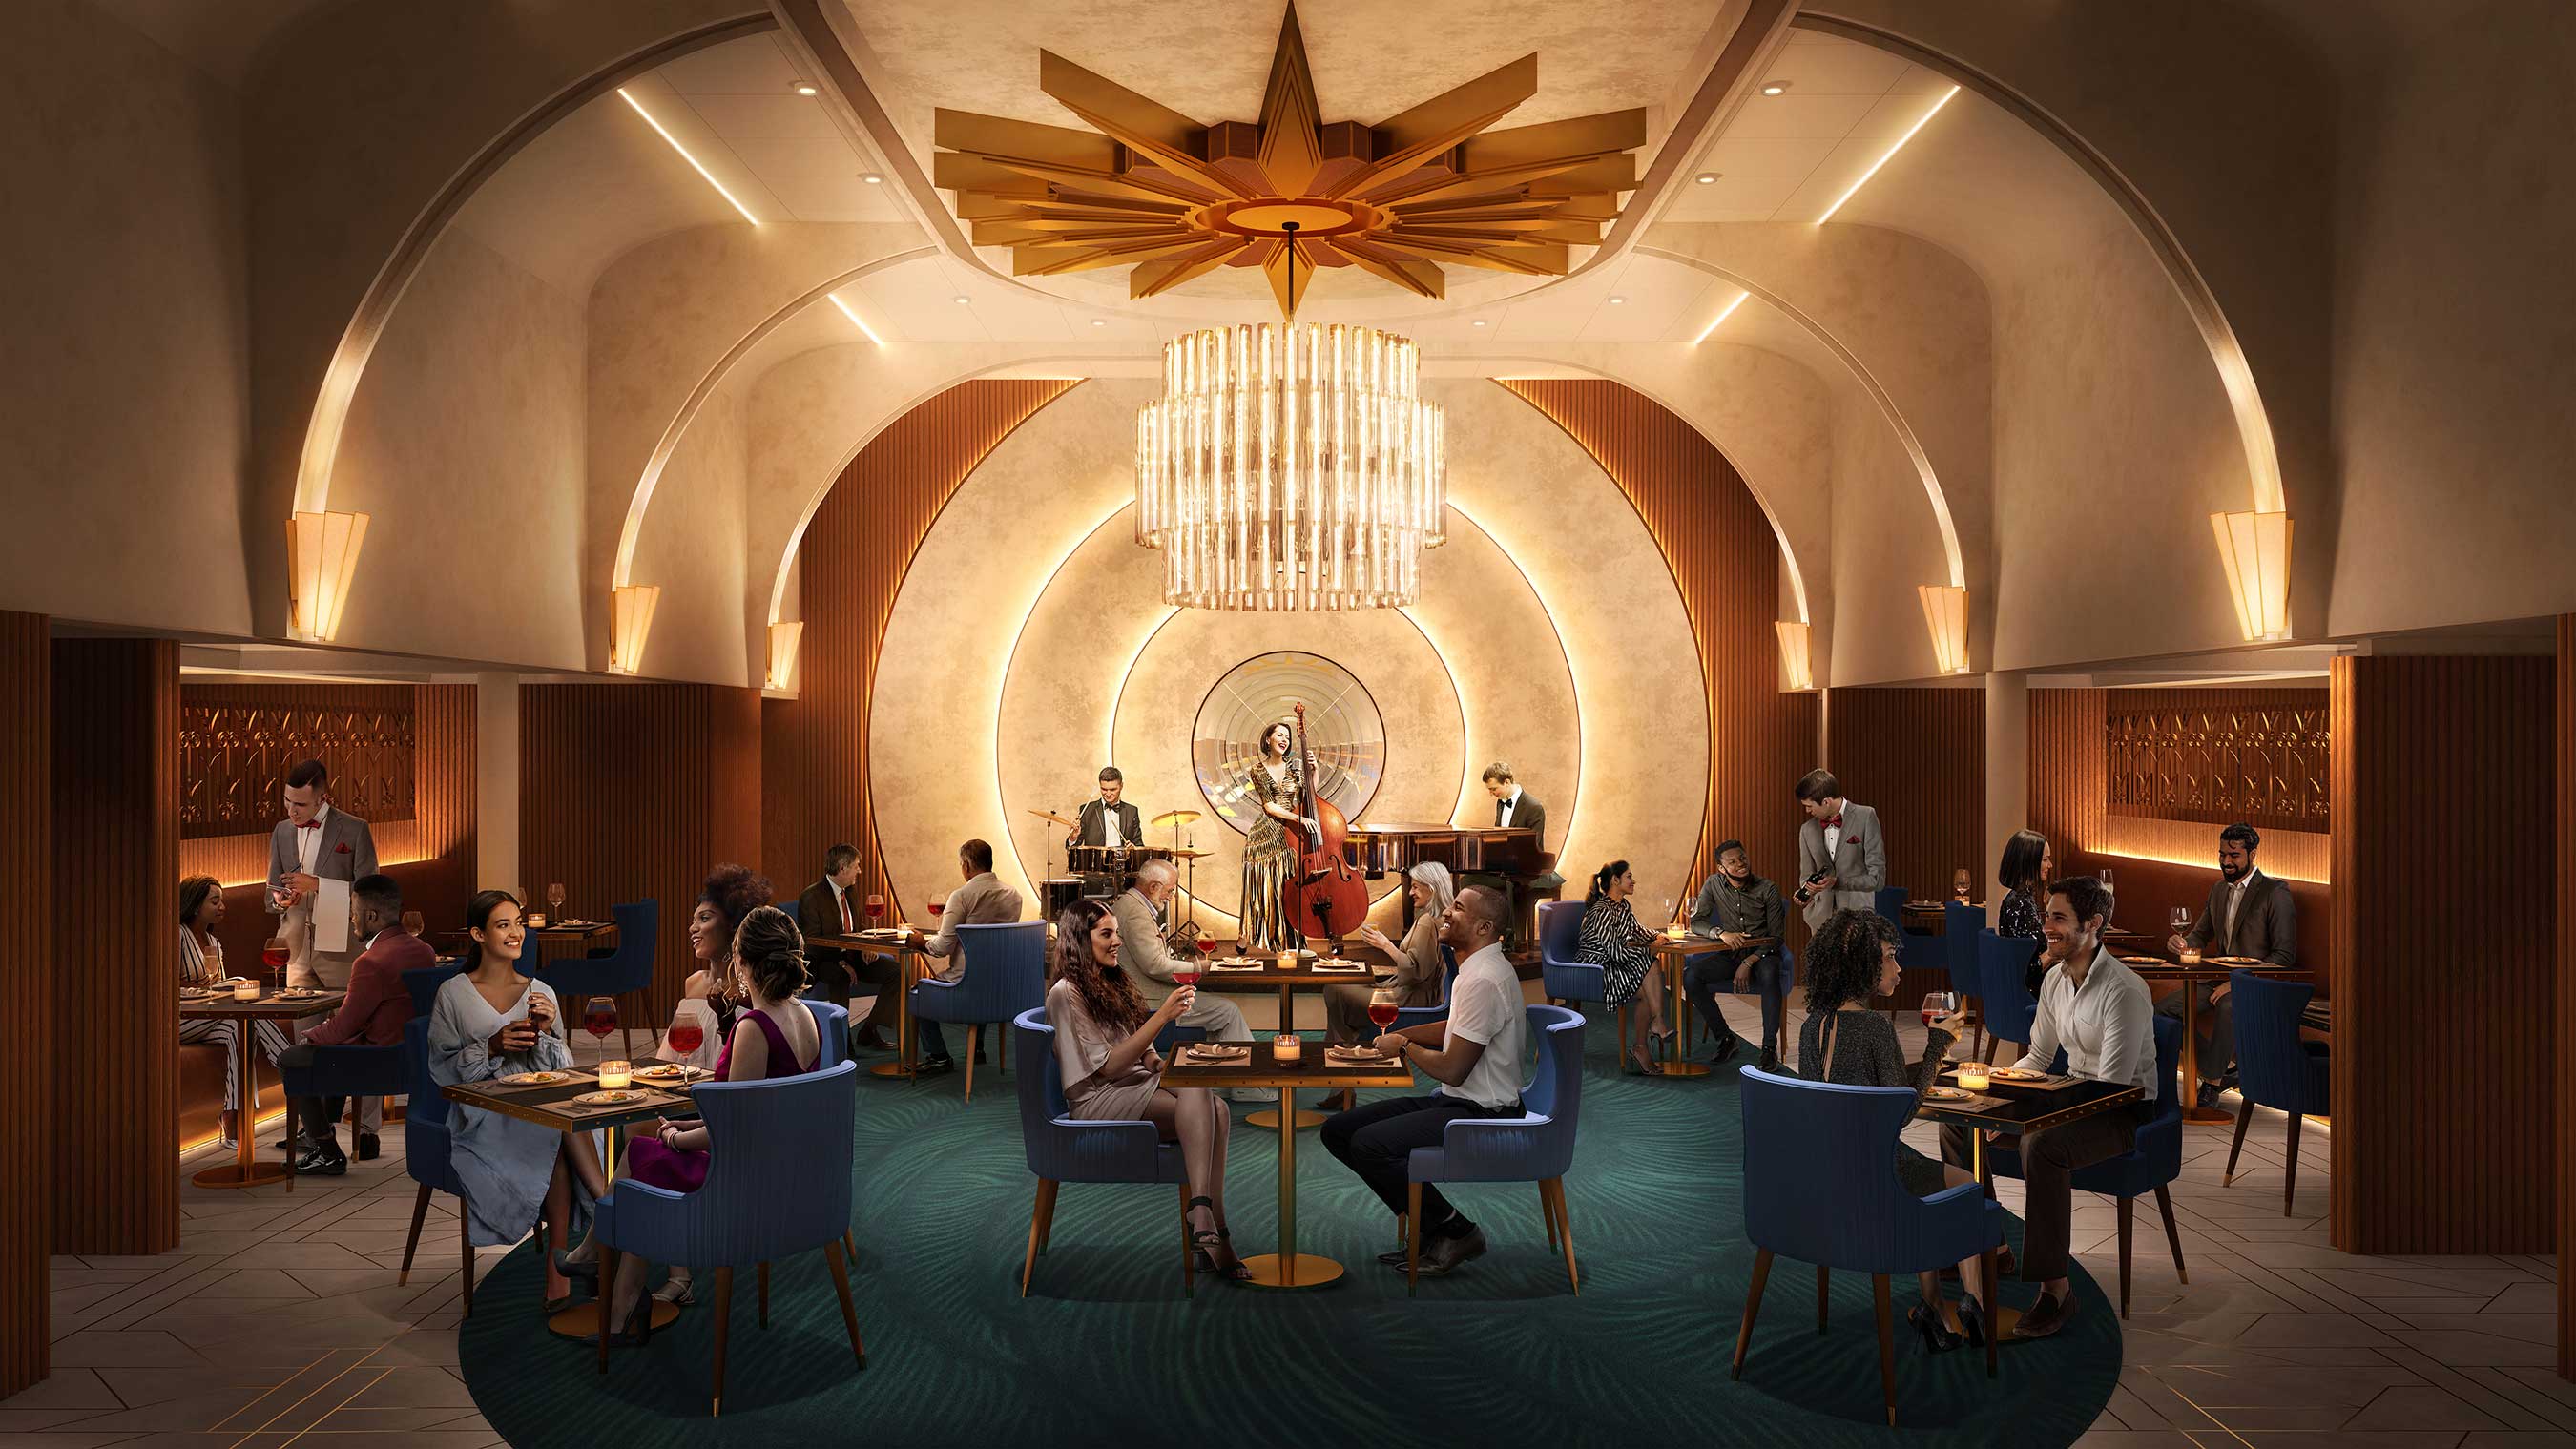 Icon of the Seas' new Empire Supper Club in Central Park is an eight-course experience, serving up premium American cuisine and tunes from a swanky three-piece band.